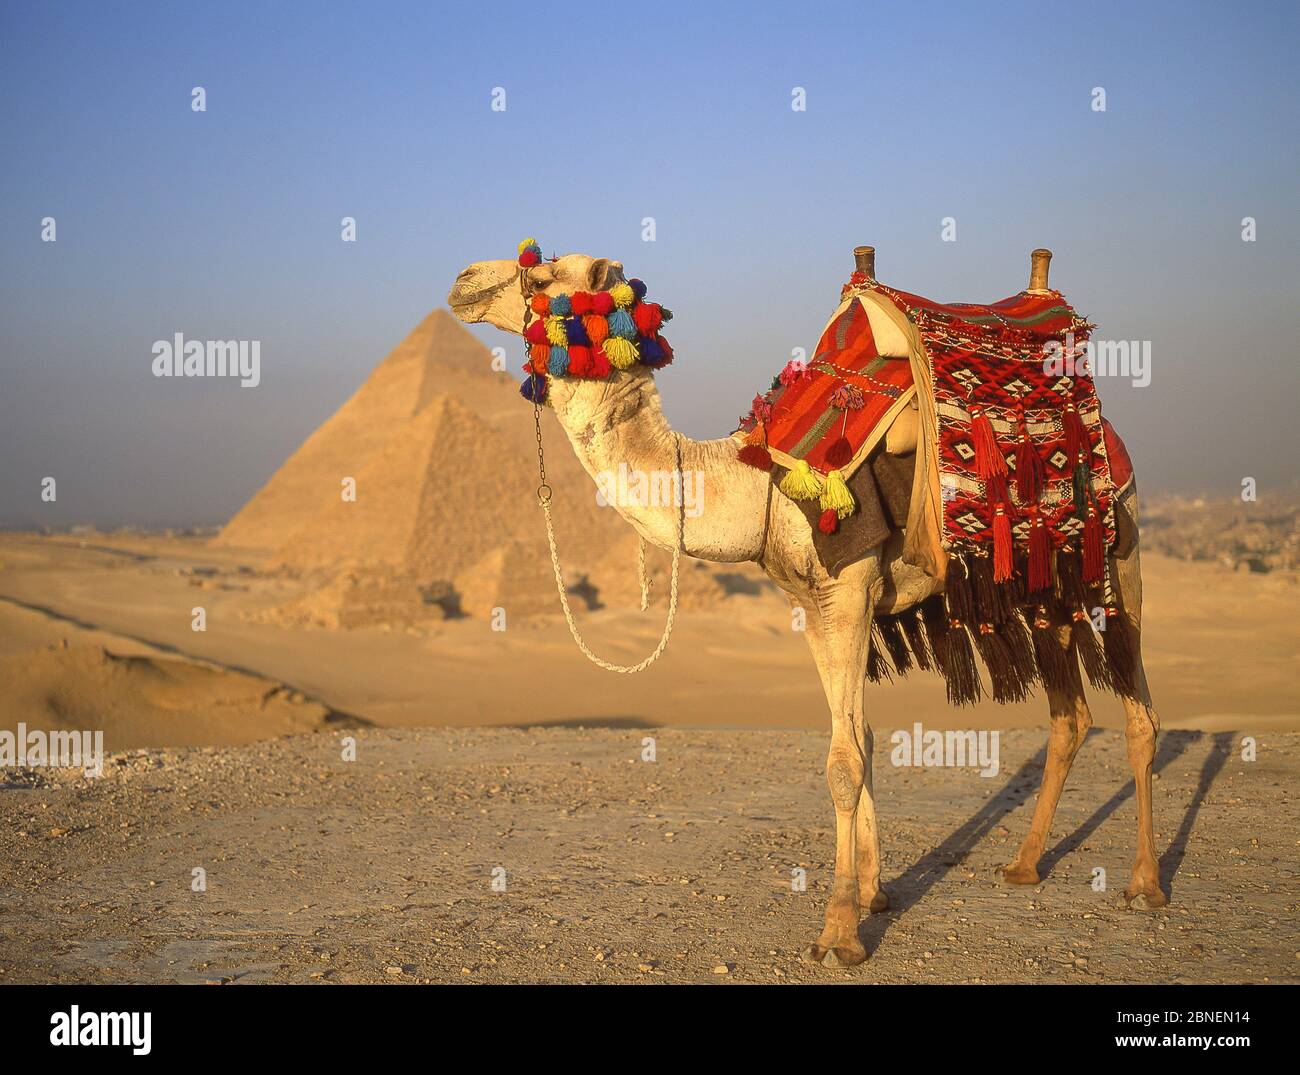 Camel decorated with tassels and decorated saddle, The Great Pyramids of Giza, Giza, Giza Governate, Republic of Egypt Stock Photo